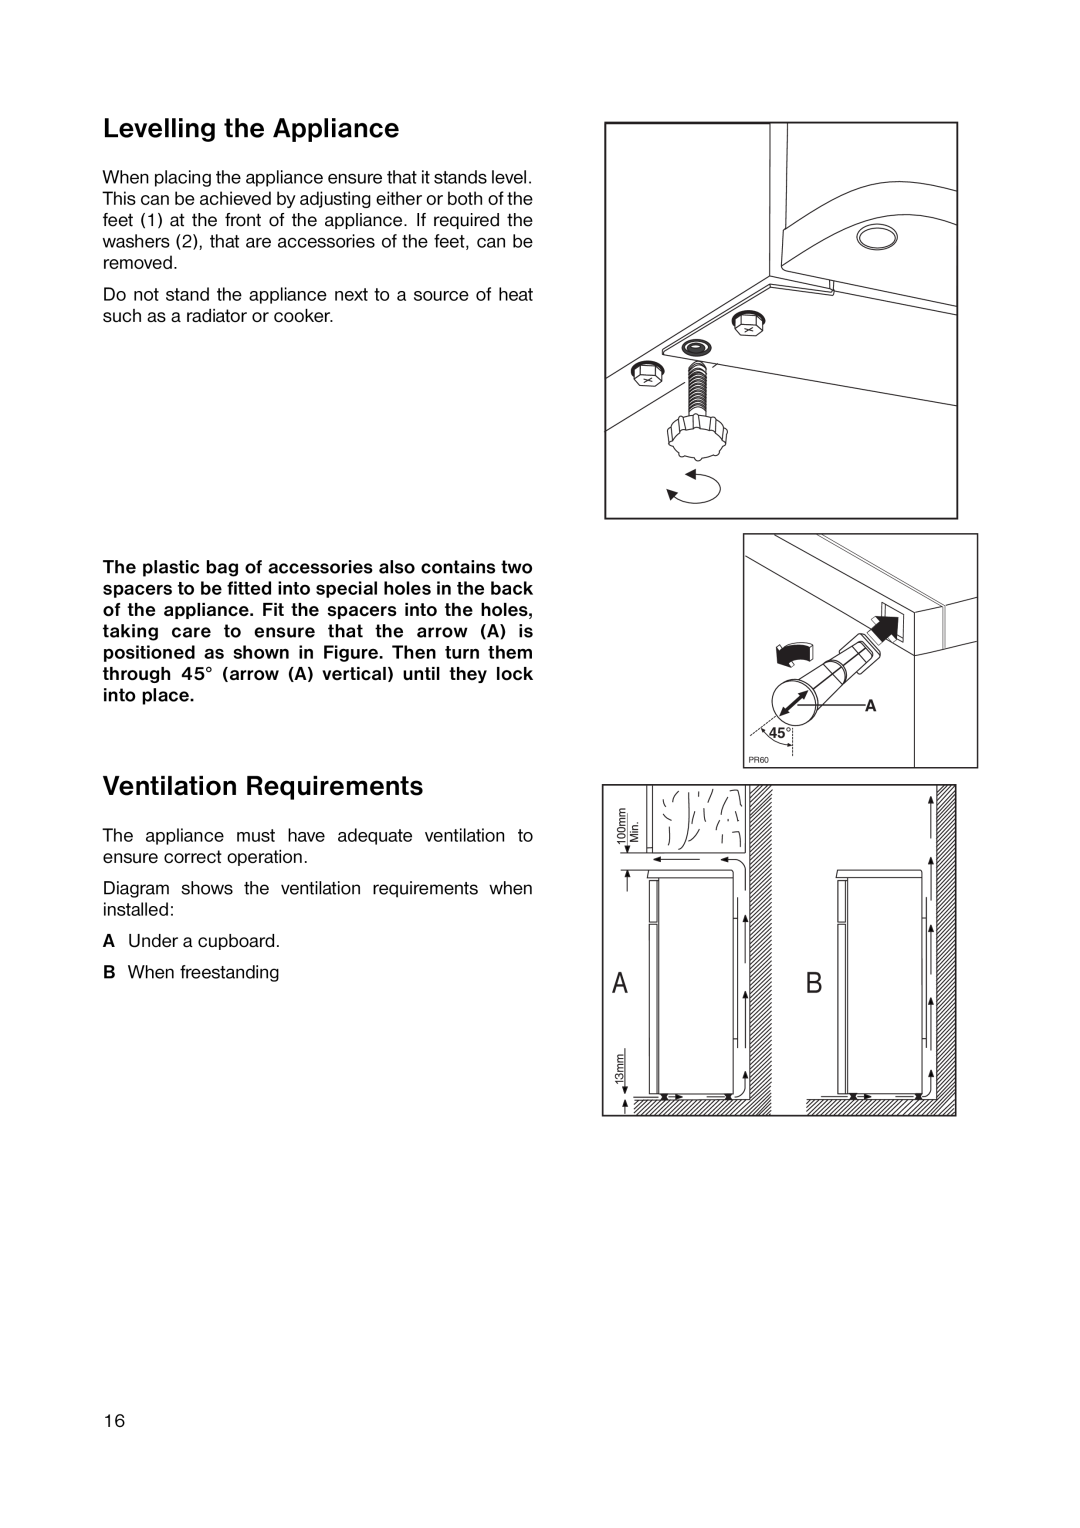 Zanussi ZRD 1843 manual Levelling the Appliance, Ventilation Requirements 